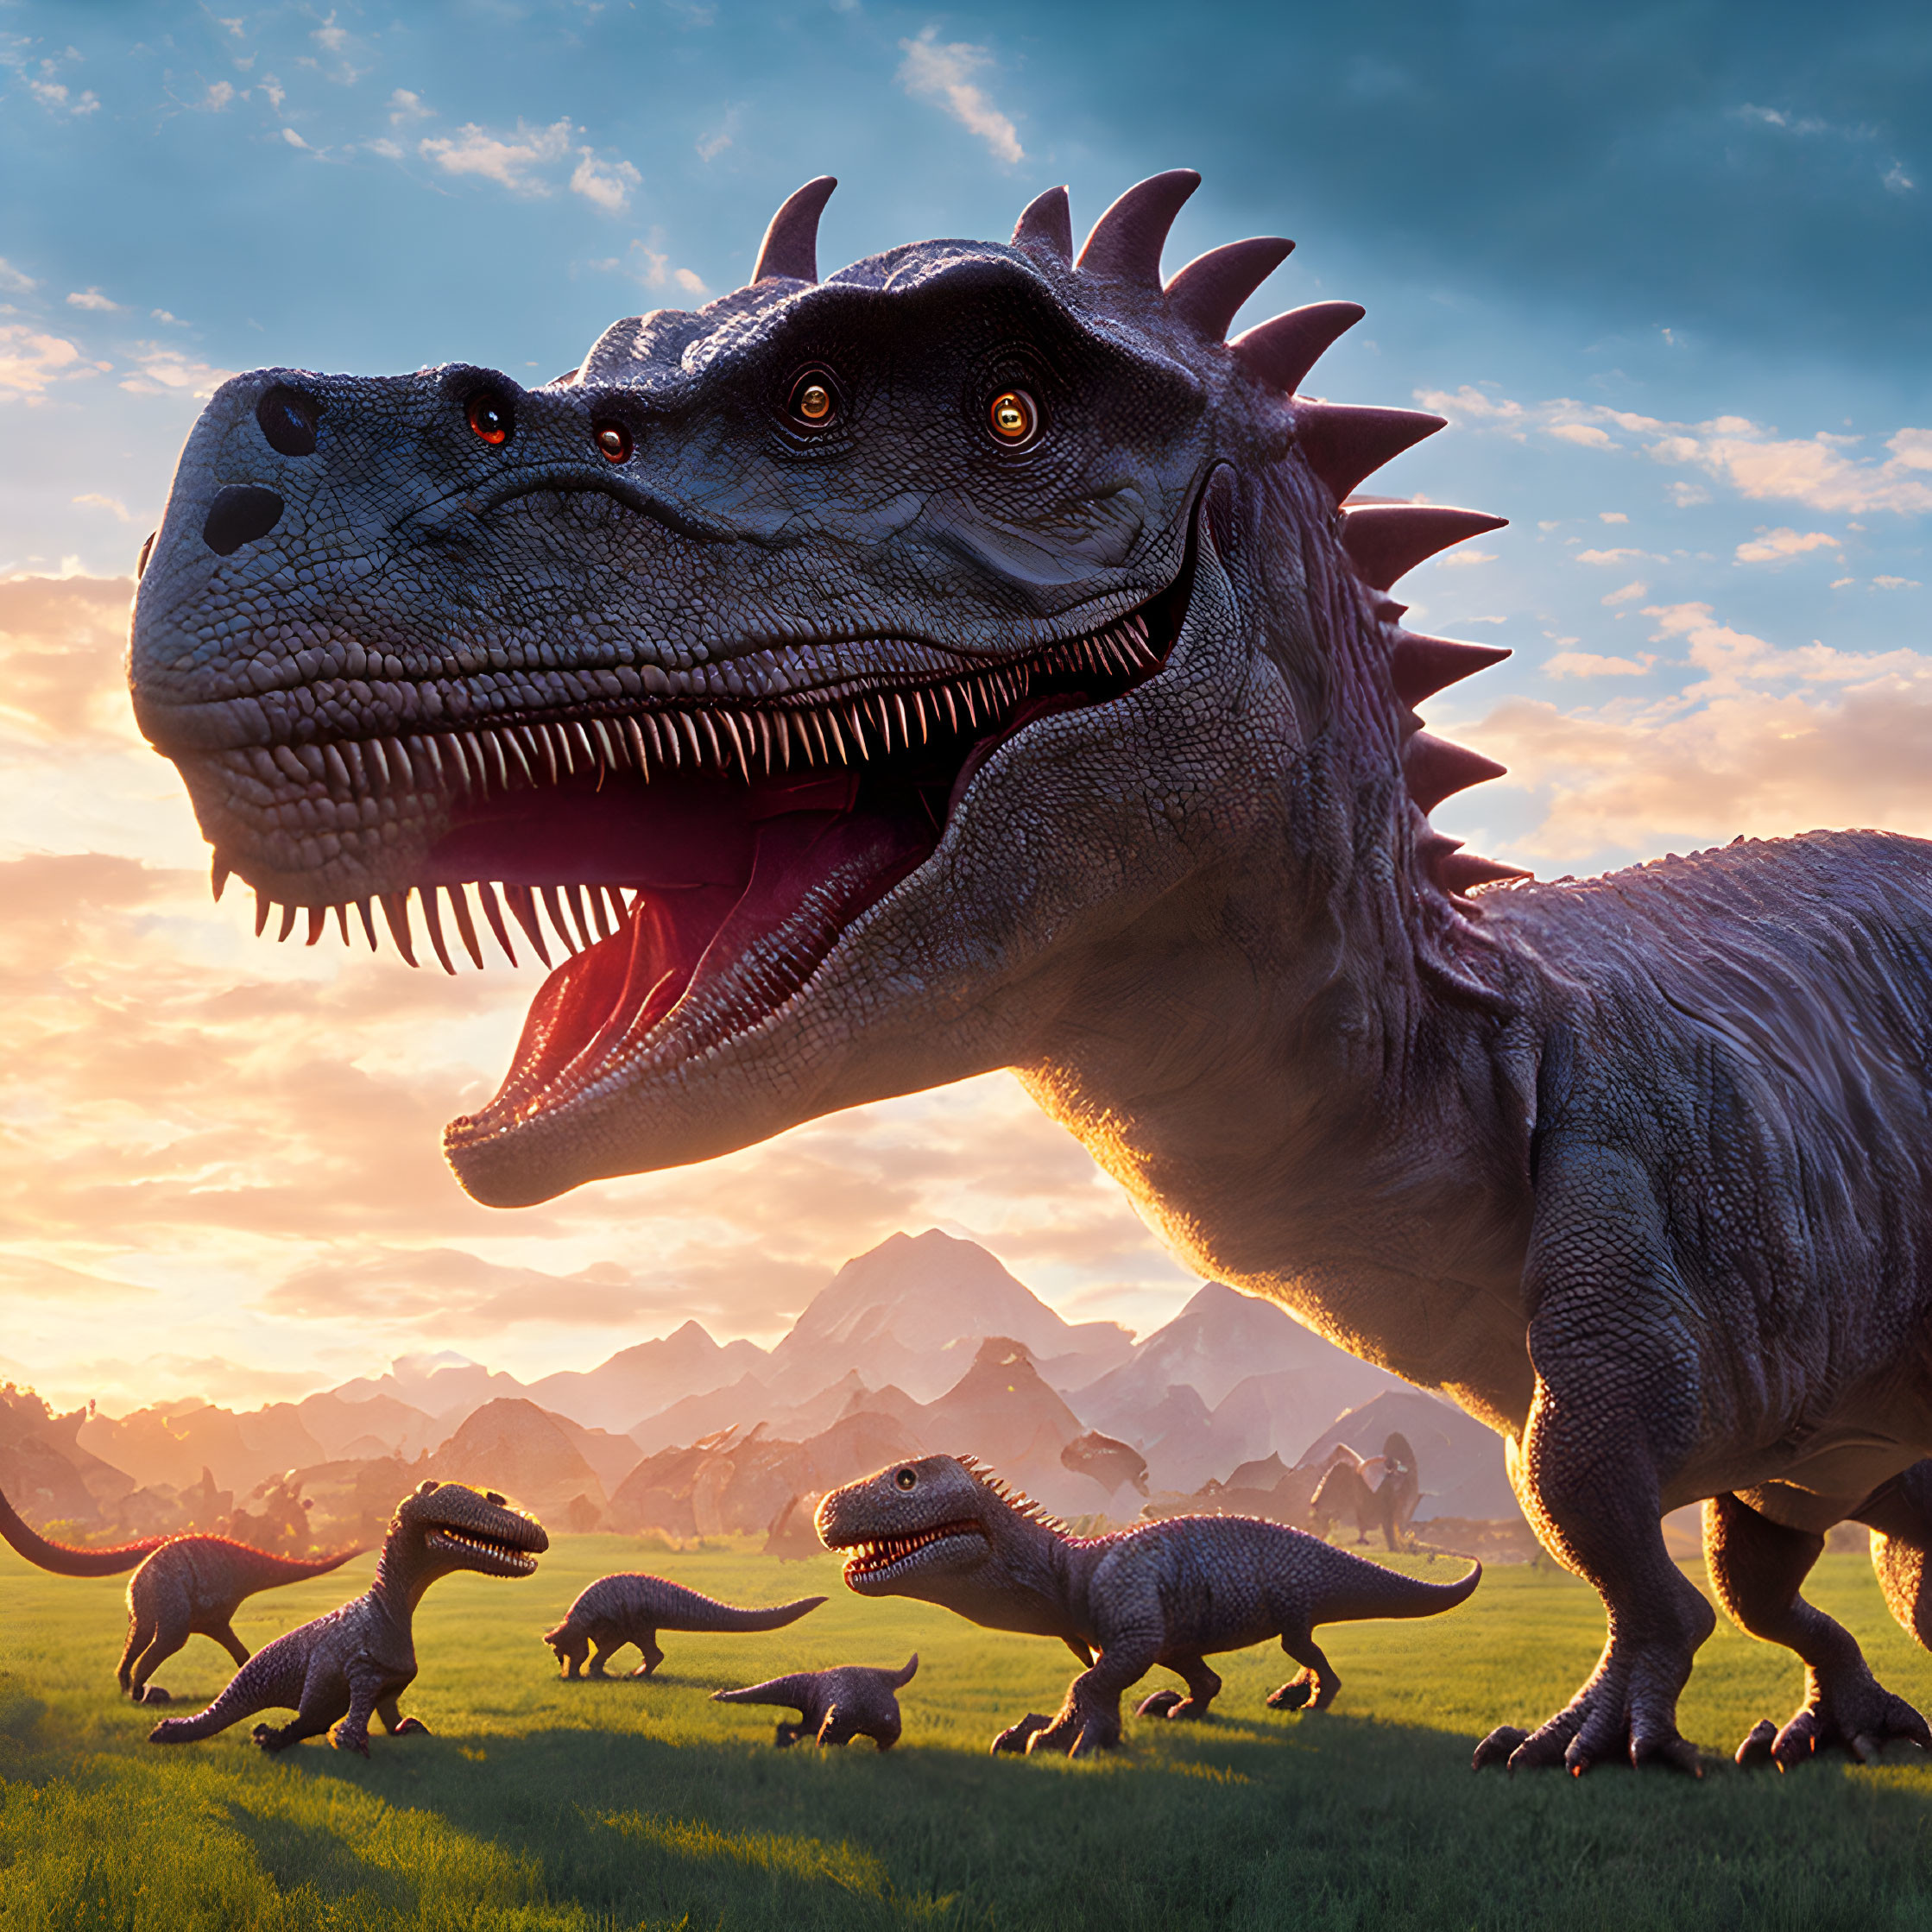 CGI Tyrannosaurus Rex with Open Mouth in Mountainous Landscape at Sunrise